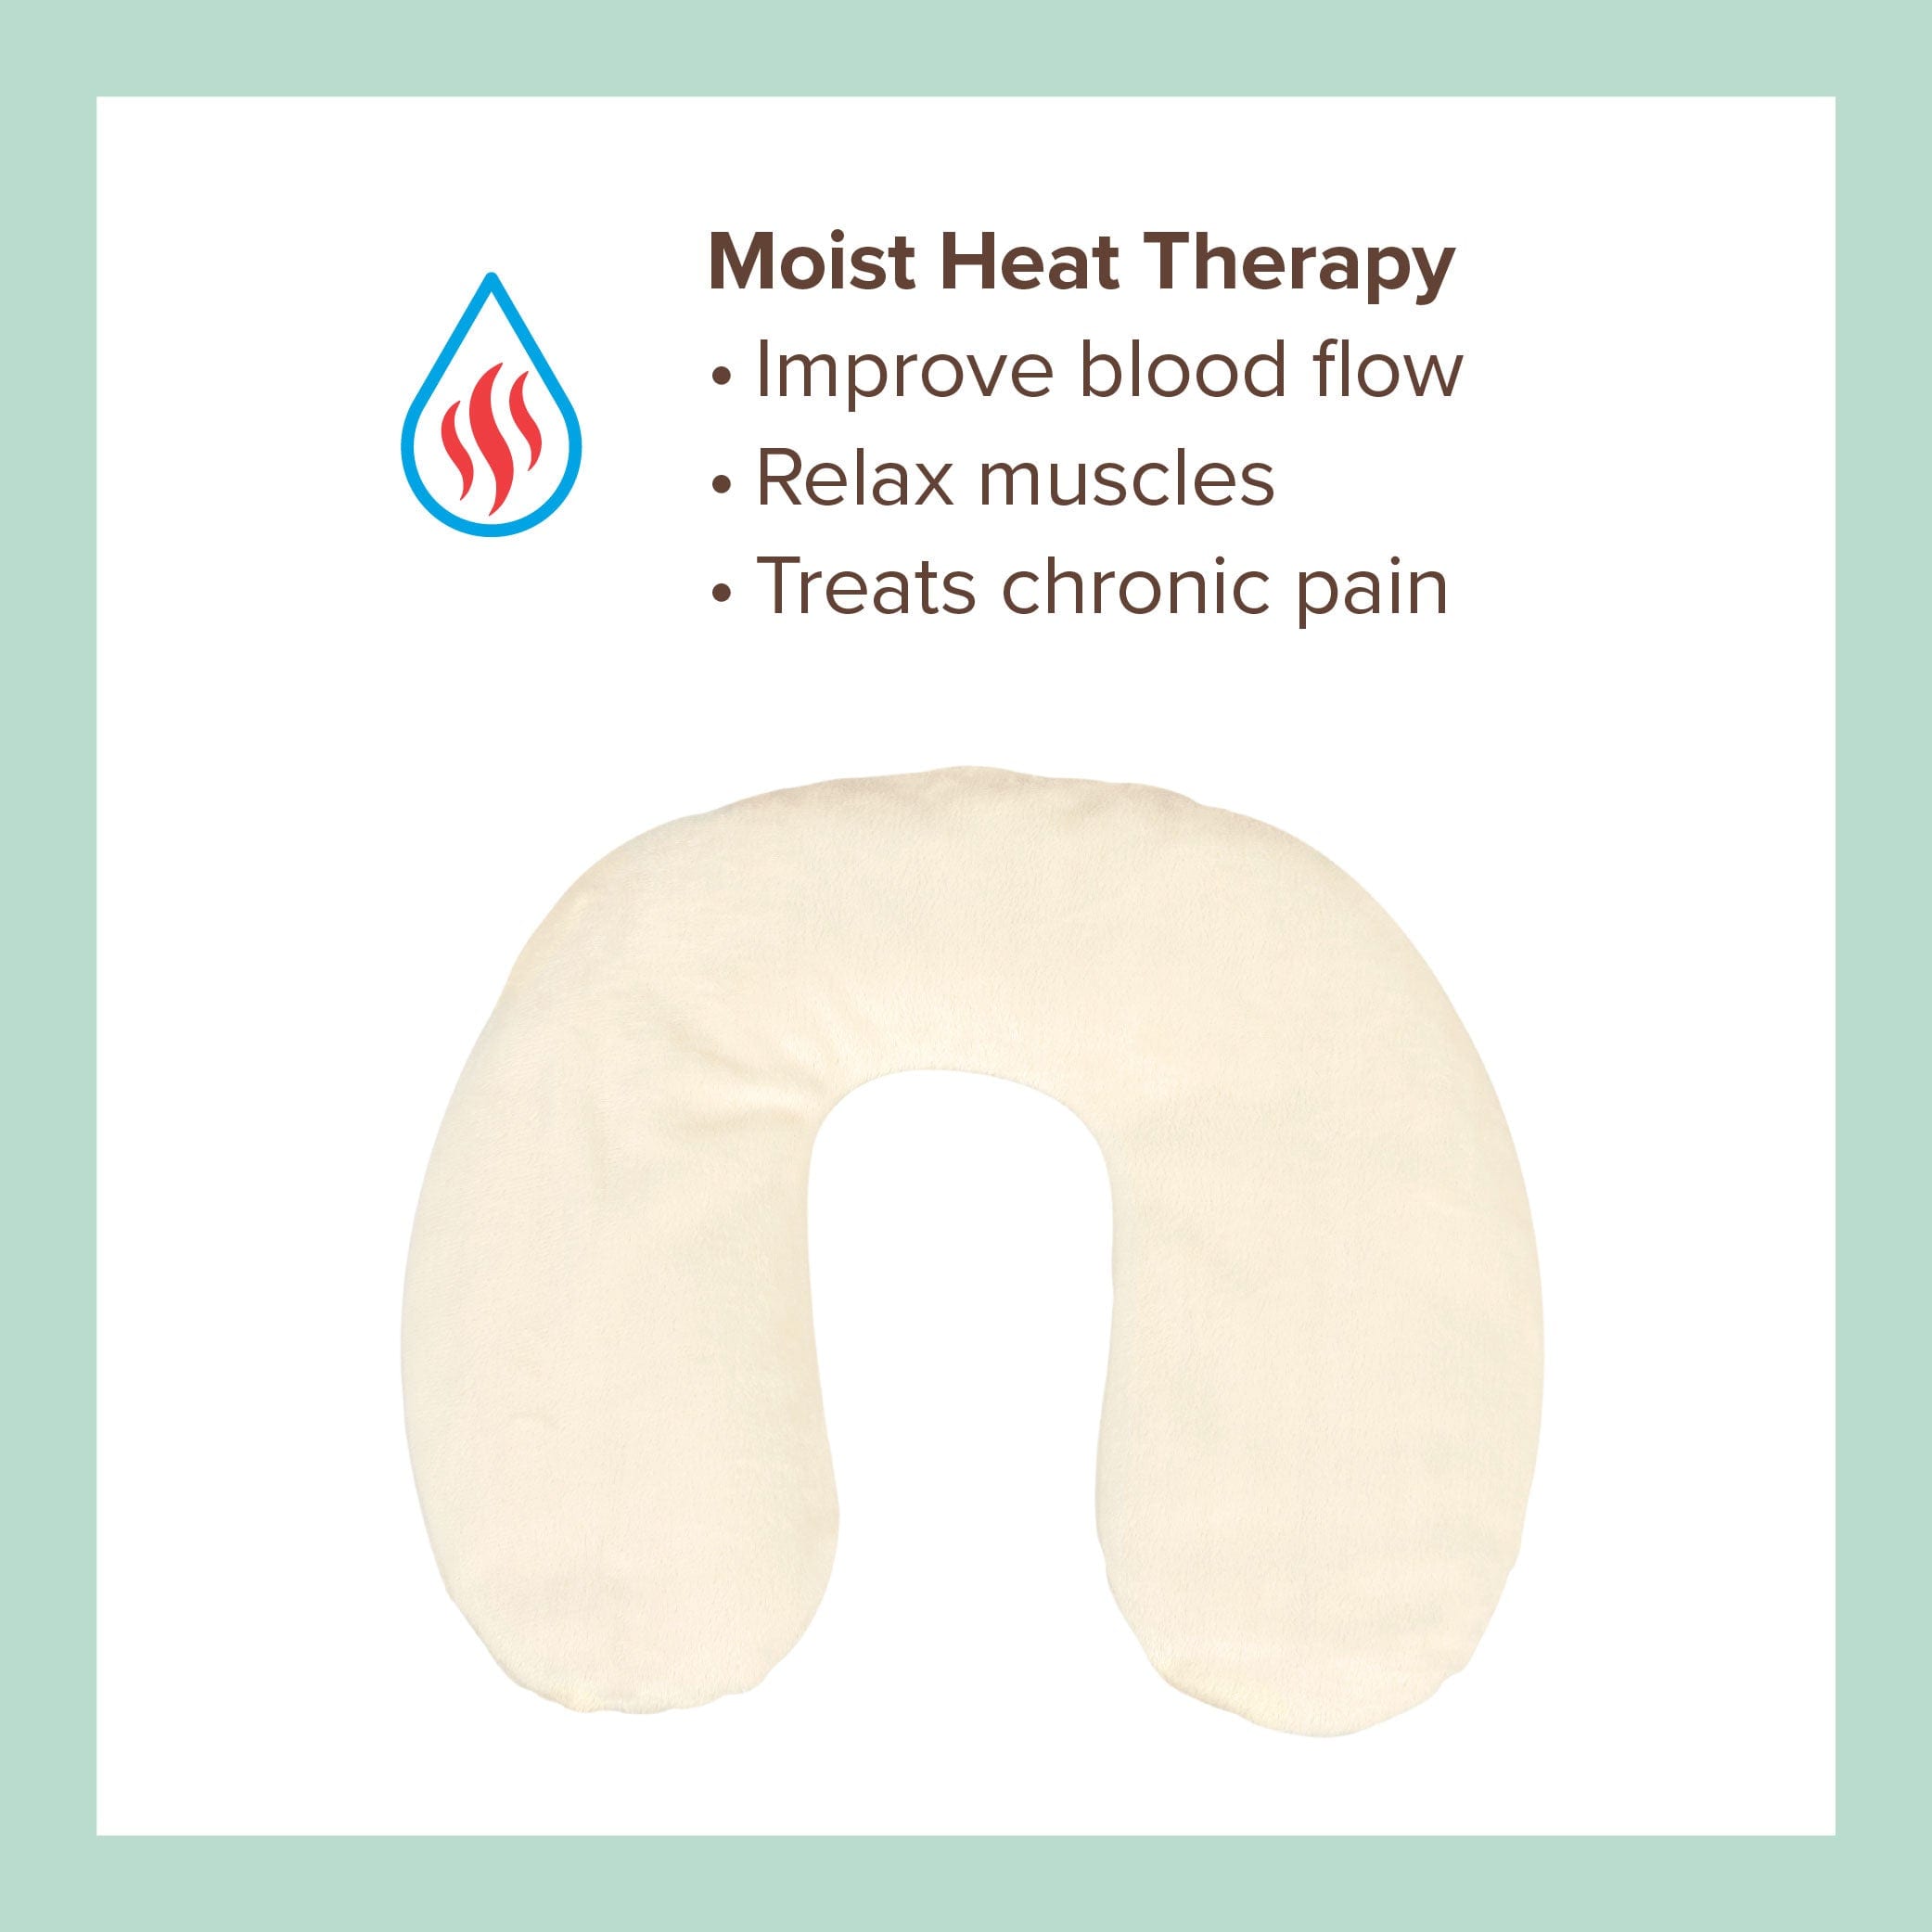 Bed Buddy Neck Pillow - Moist heat therapy: improve blood flow, relax muscles, and treats chronic pain